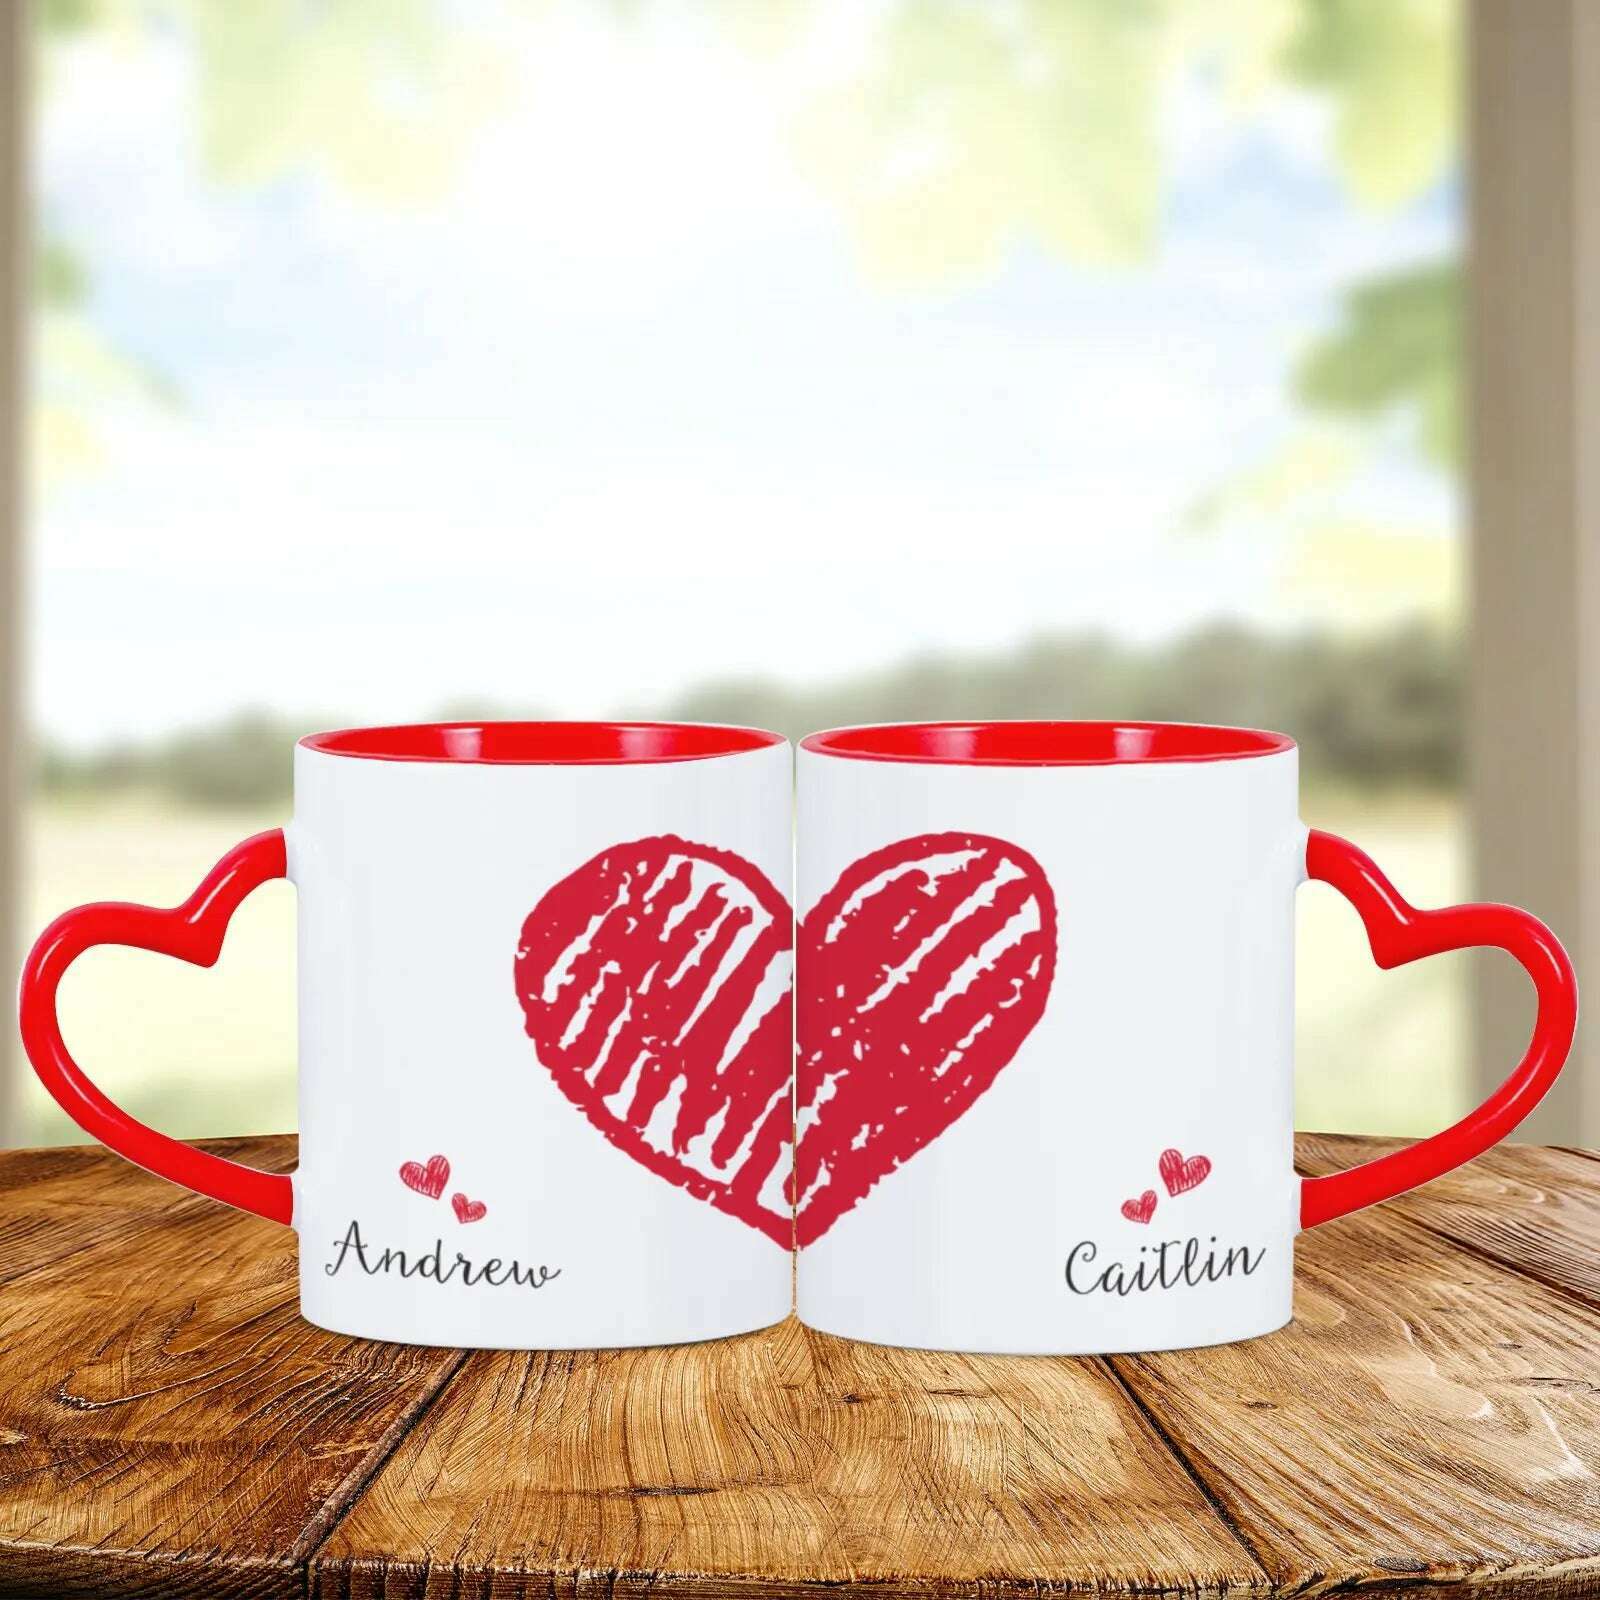 KIMLUD, 2pc Heart Handle Personalized Name Couple Coffee Mug for Girlfriend Wife Husband Valentine's Day present for Couples Coffee Mugs, Red / 325ml, KIMLUD Women's Clothes